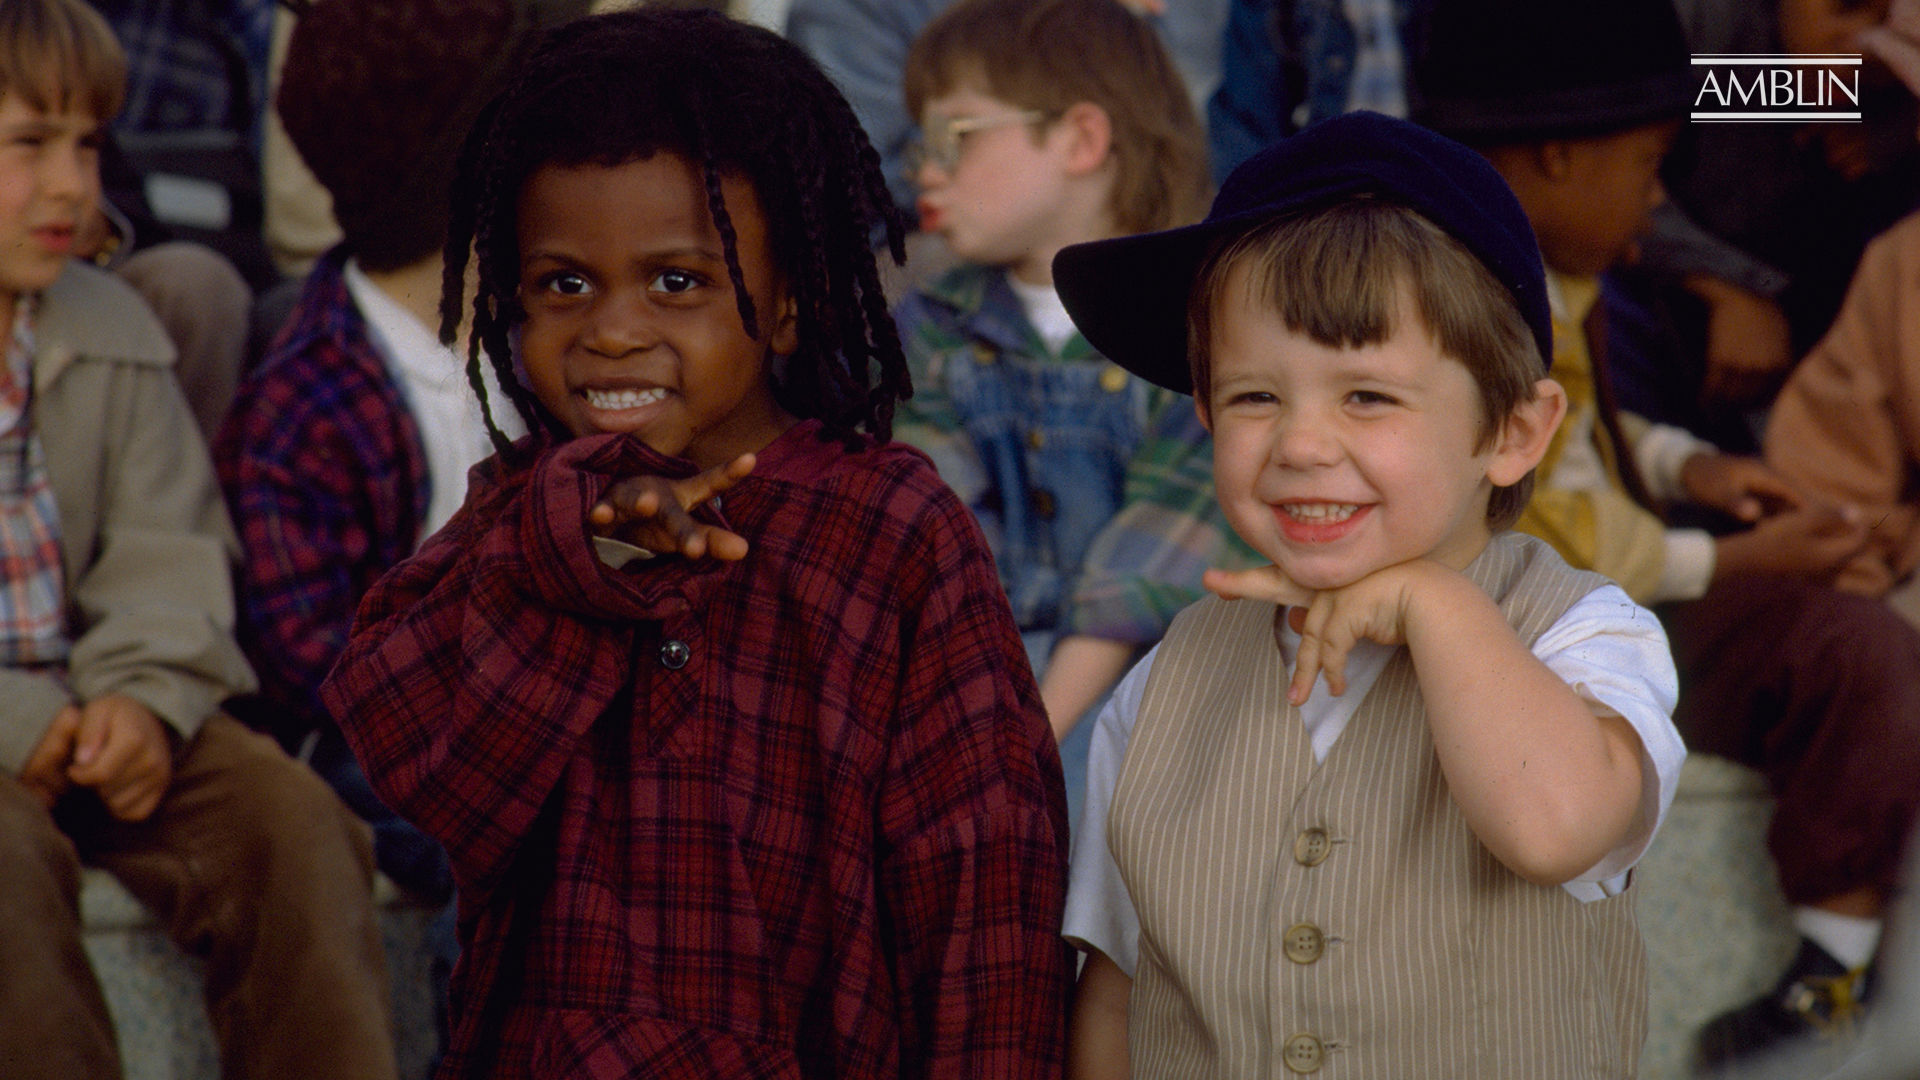 The Little Rascals (1994) - About the Movie